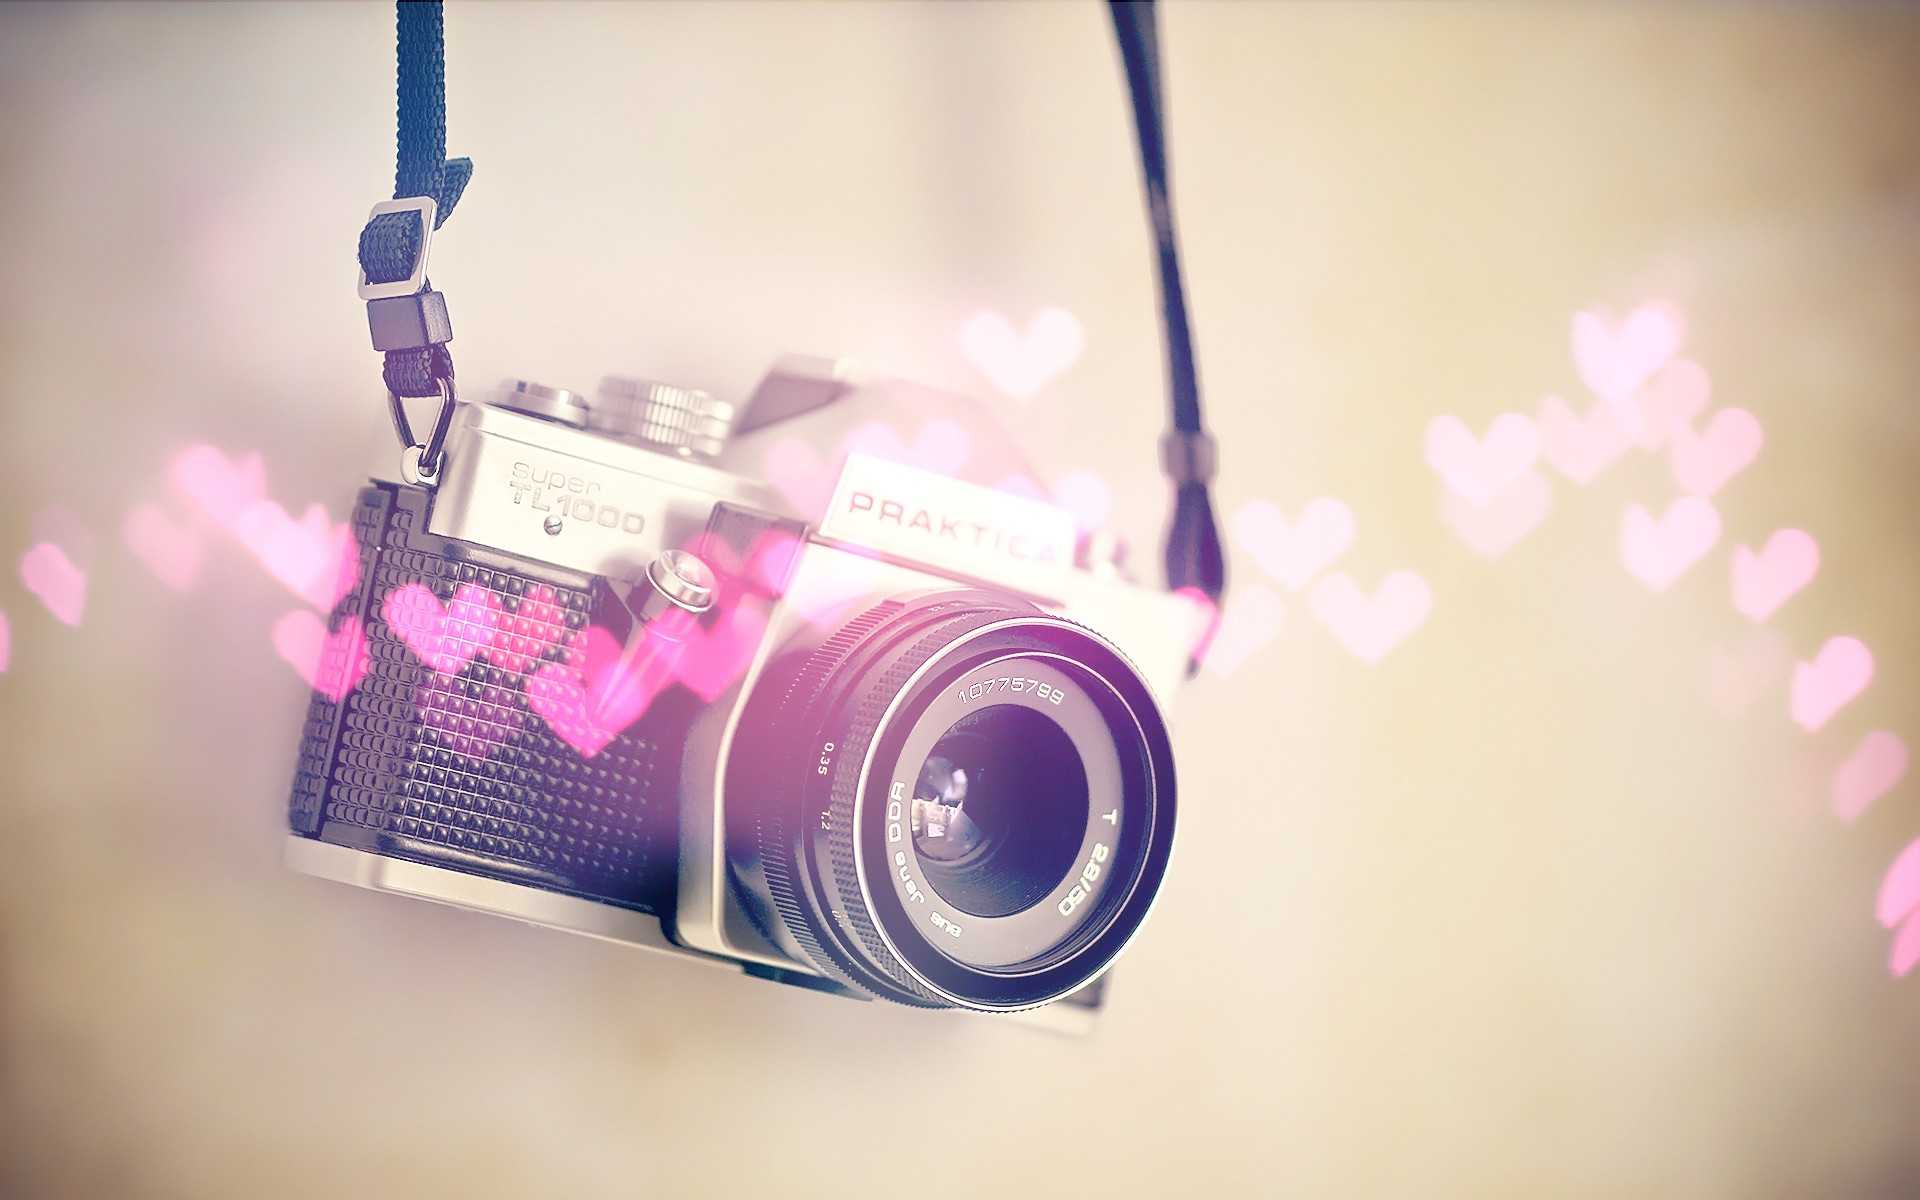 girly wallpapers for bedrooms,photograph,pink,purple,cameras & optics,snapshot